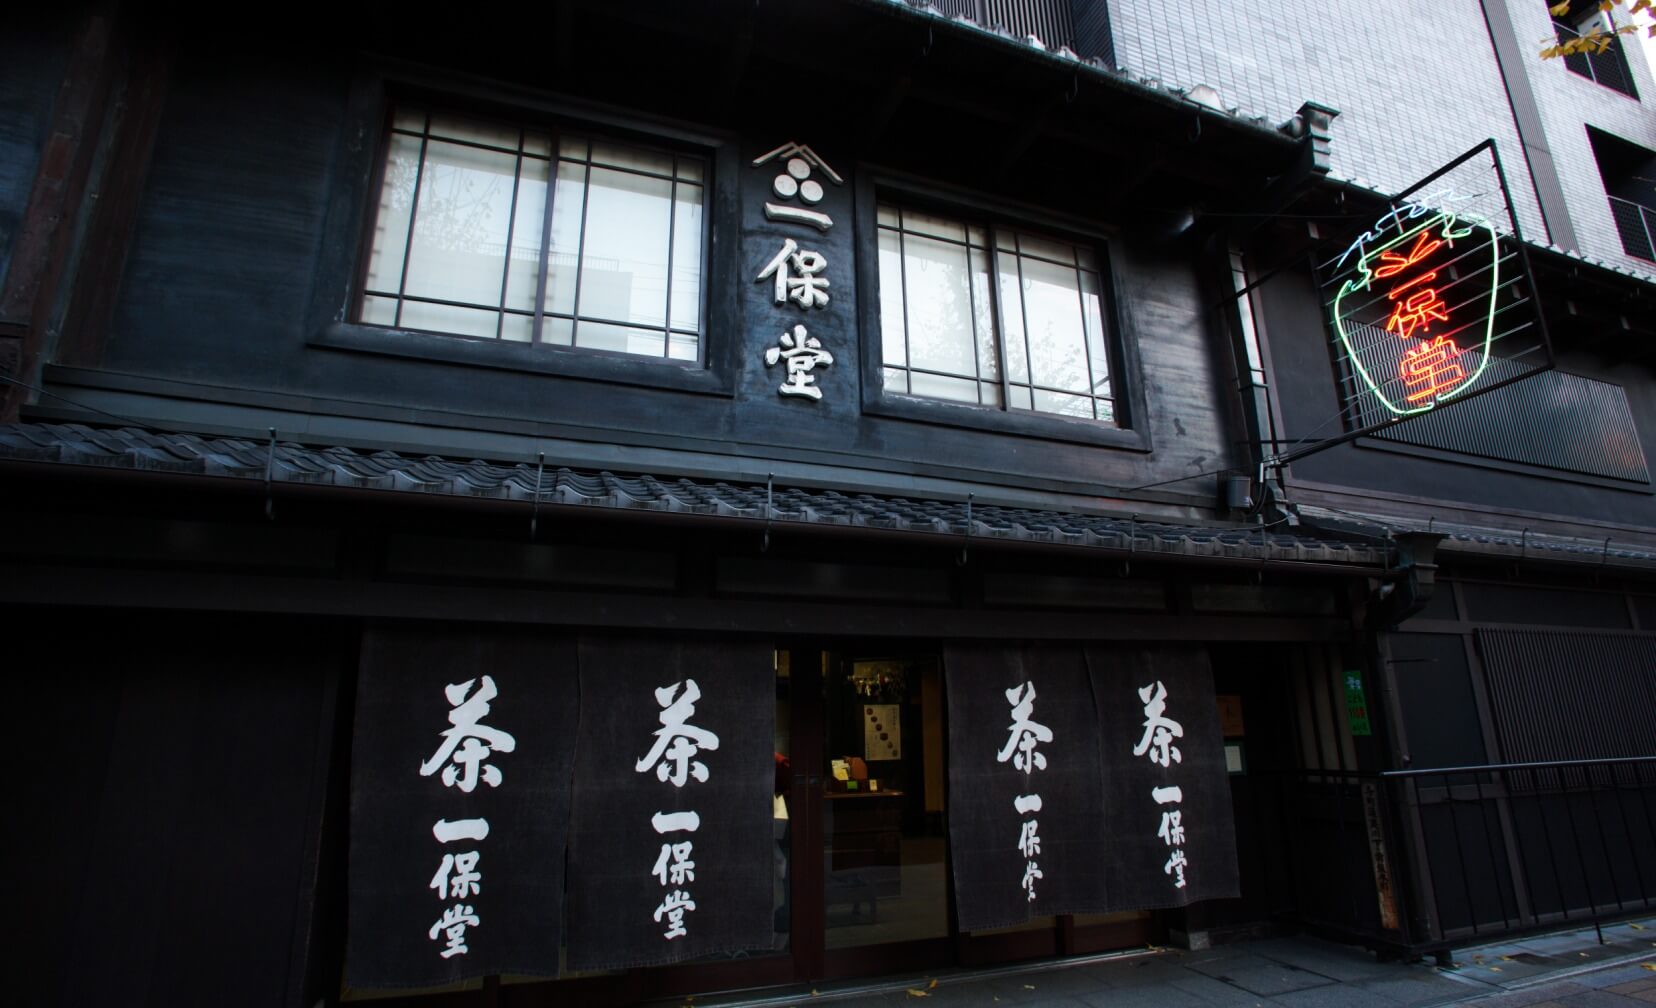 Front of of Ippodo Tea's flagship store, tearoom and headquarters black storefront in Kyoto, Japan with outdoor lit neon sign